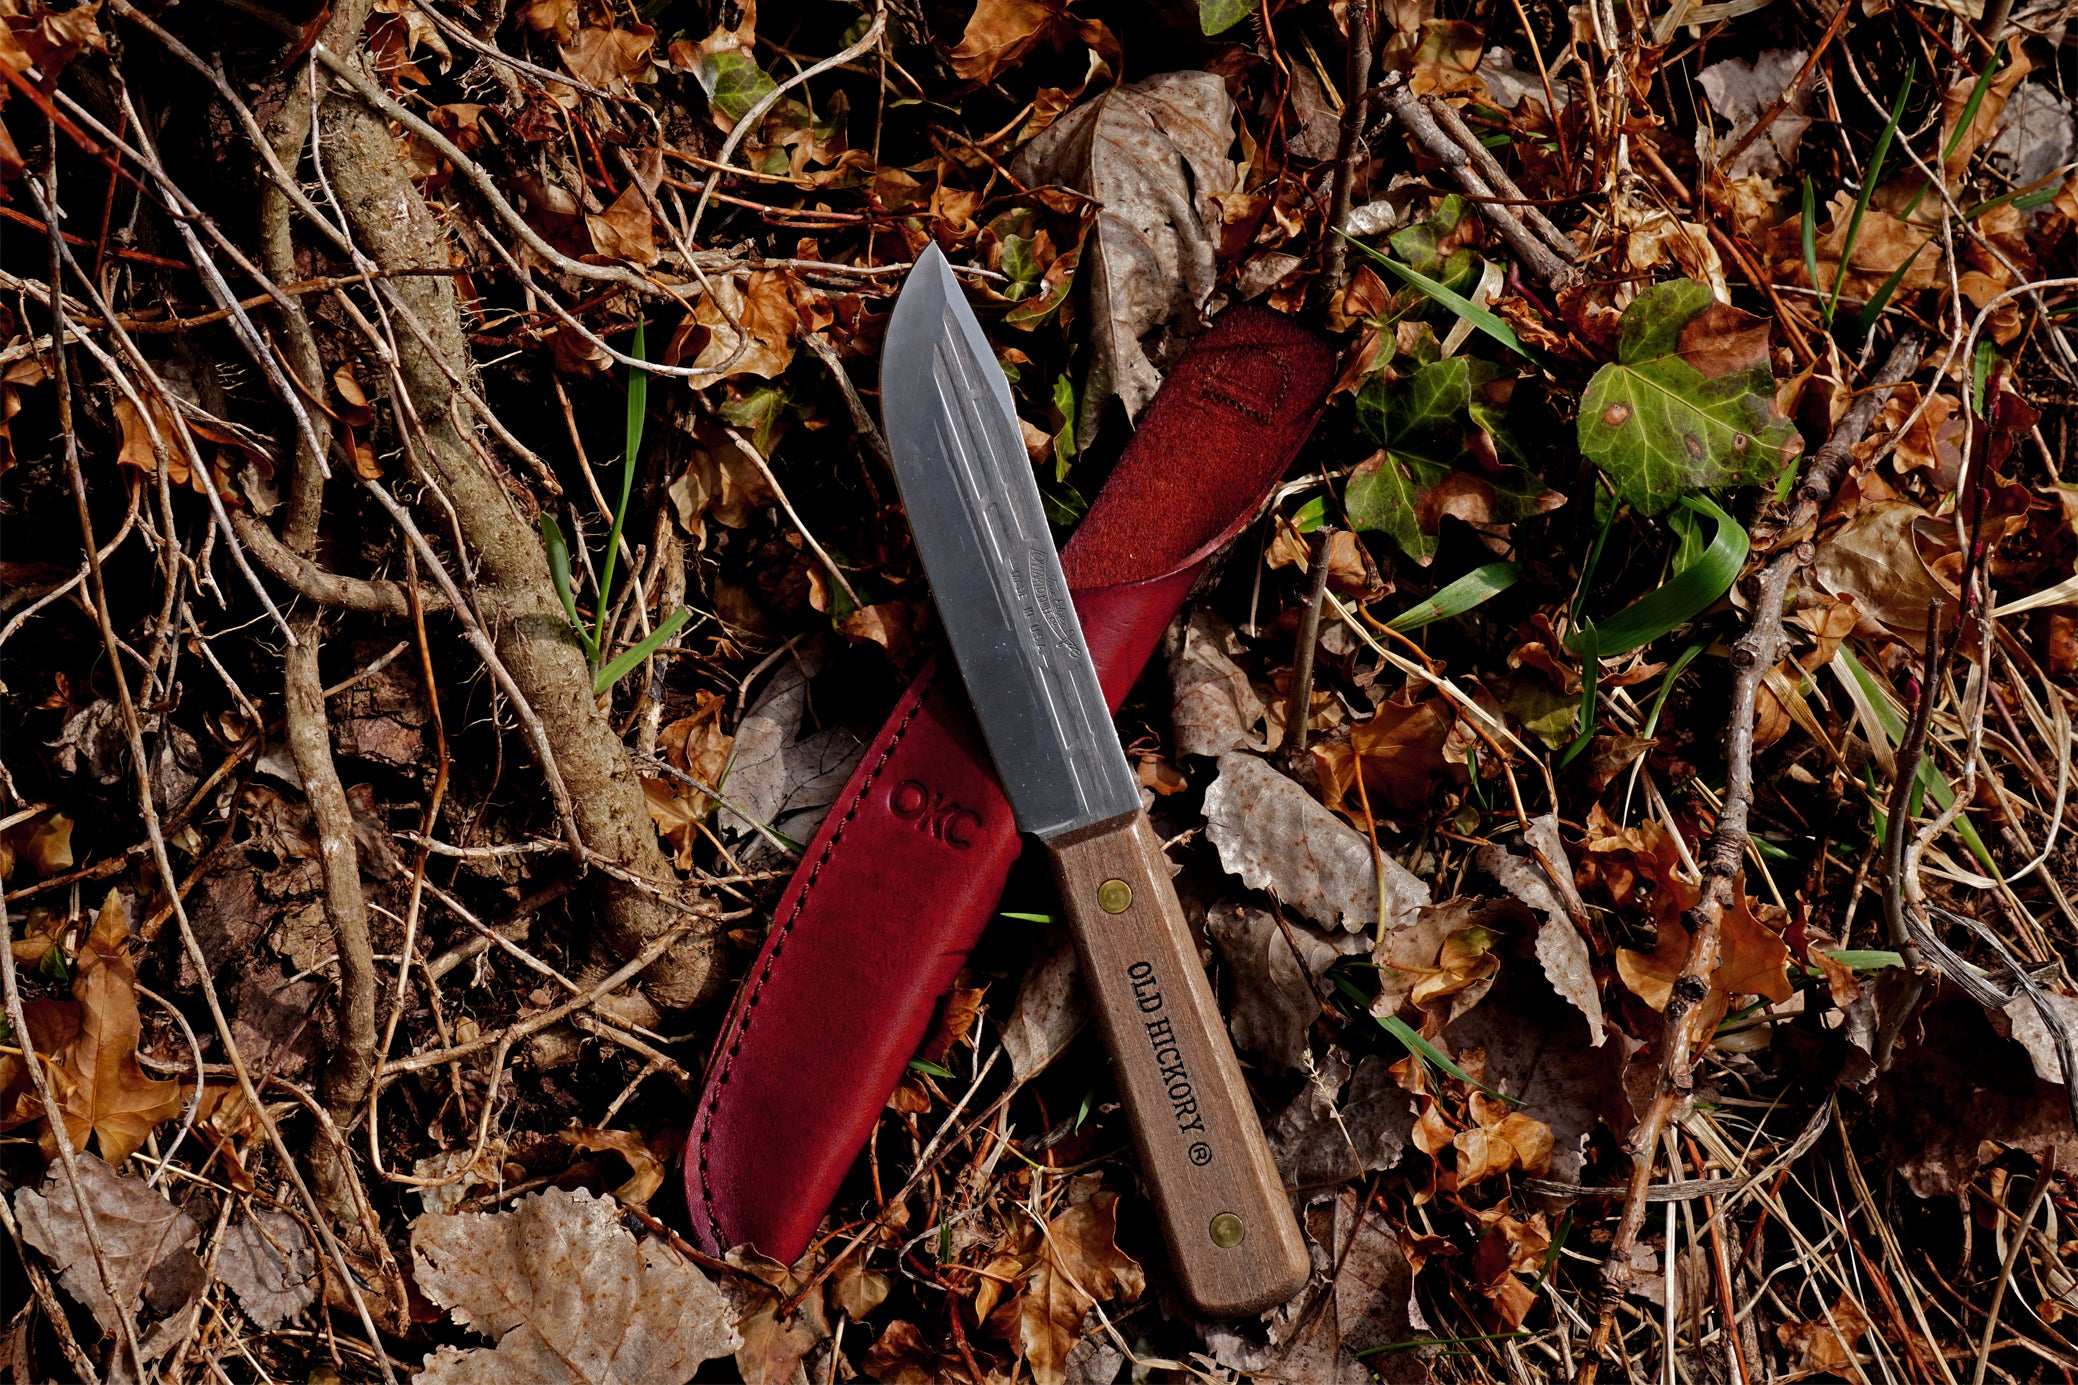 Old-World Style Comes Along with the Old Hickory Hunting Knife from Ontario Knife Company® - OKC® Brings Classic Old School Artistry and Quality in a Durable, Multi-Purpose Knife from Old Hickory Line